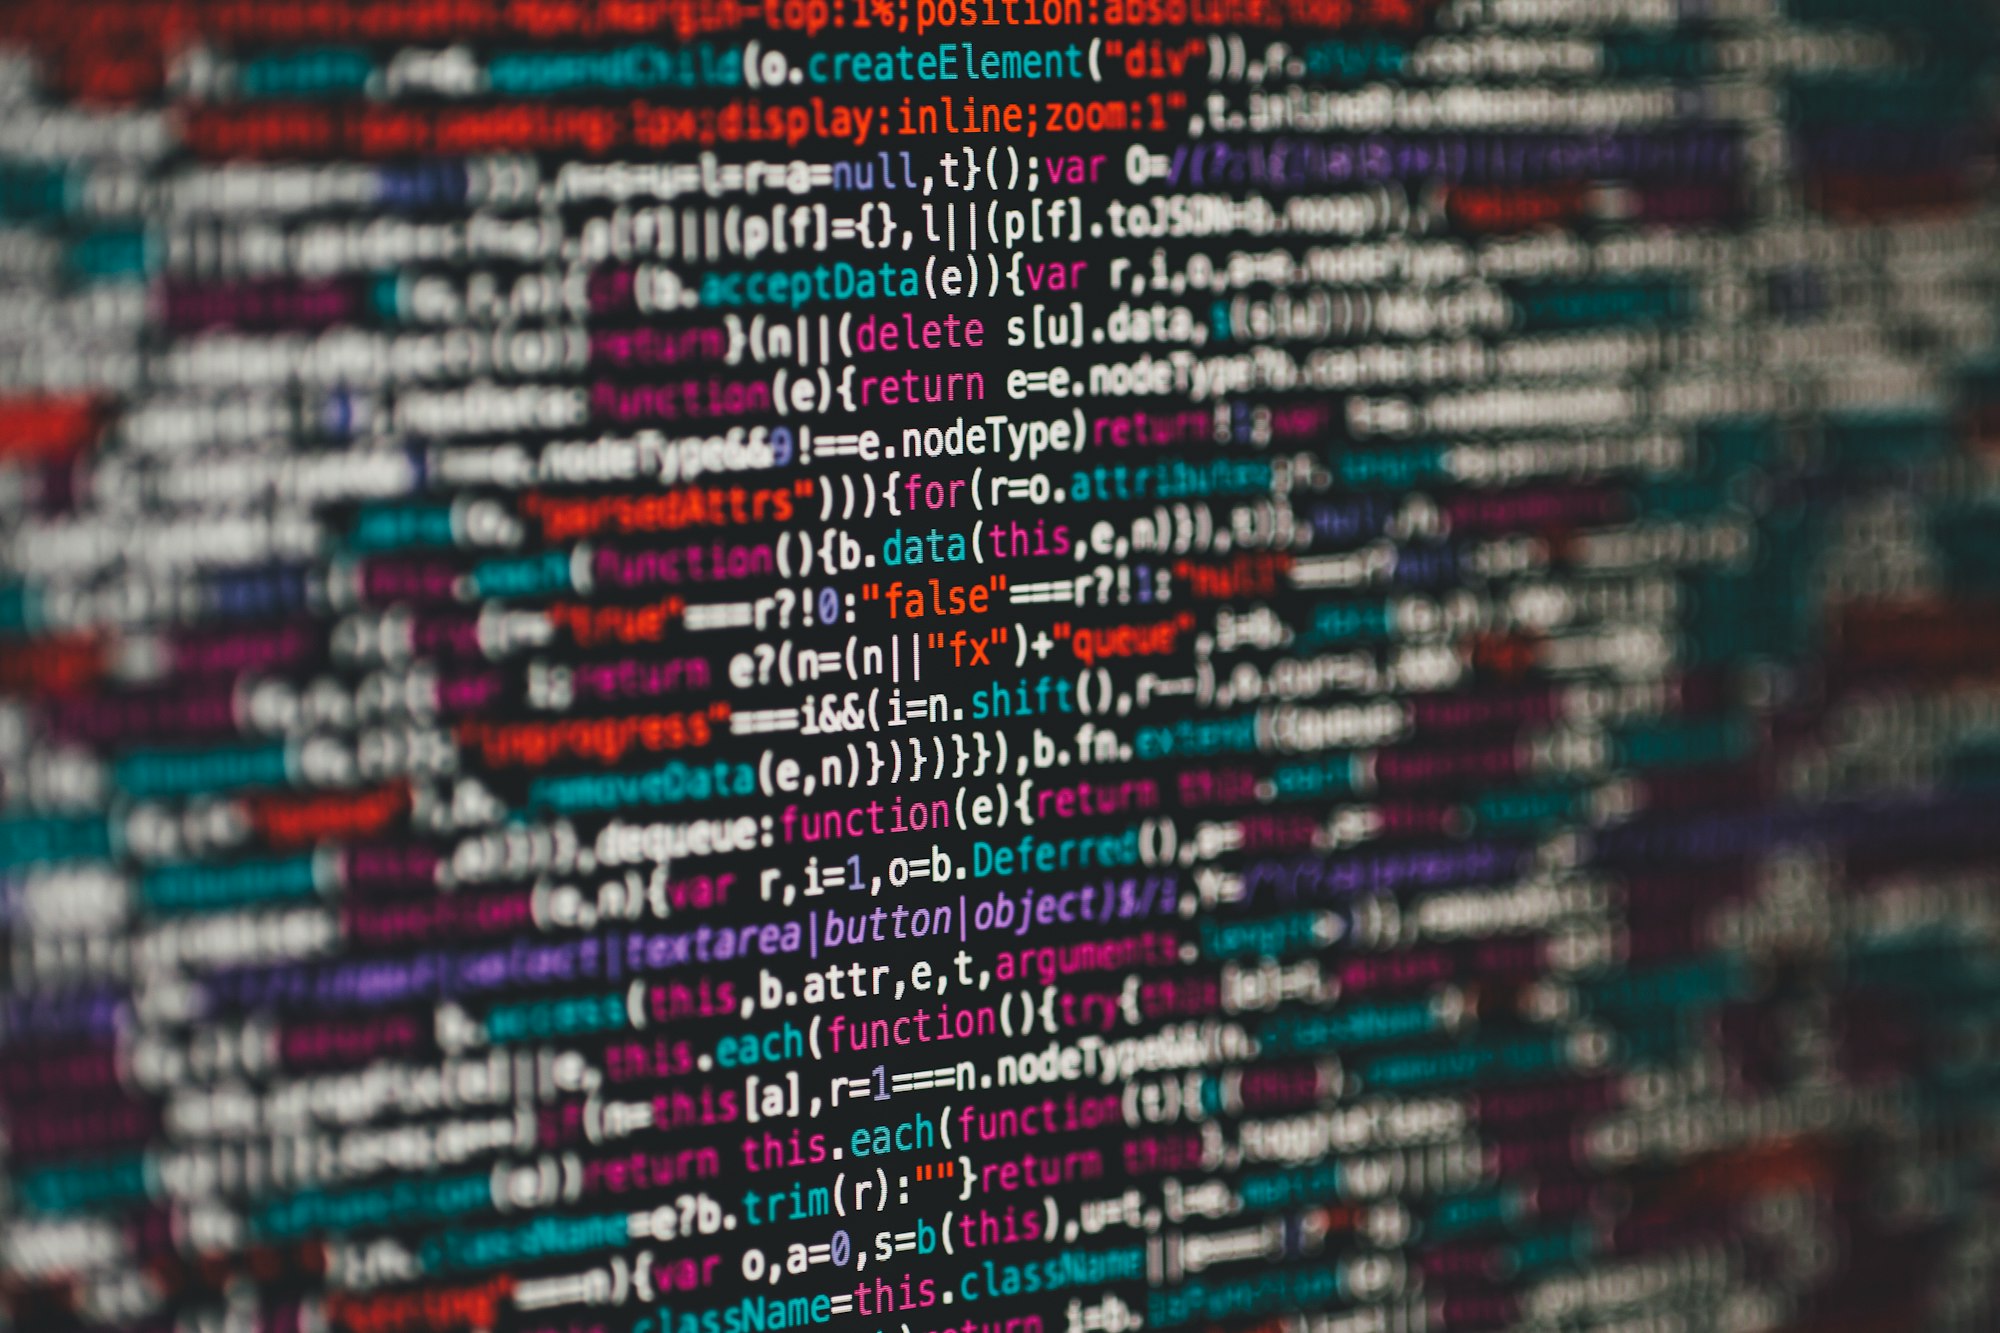 Binary HTML/CSS Javascript source code for webdesign. Made with analog vintage lens, Leica APO Macro Elmarit-R 2.8 100mm (Year: 1993)